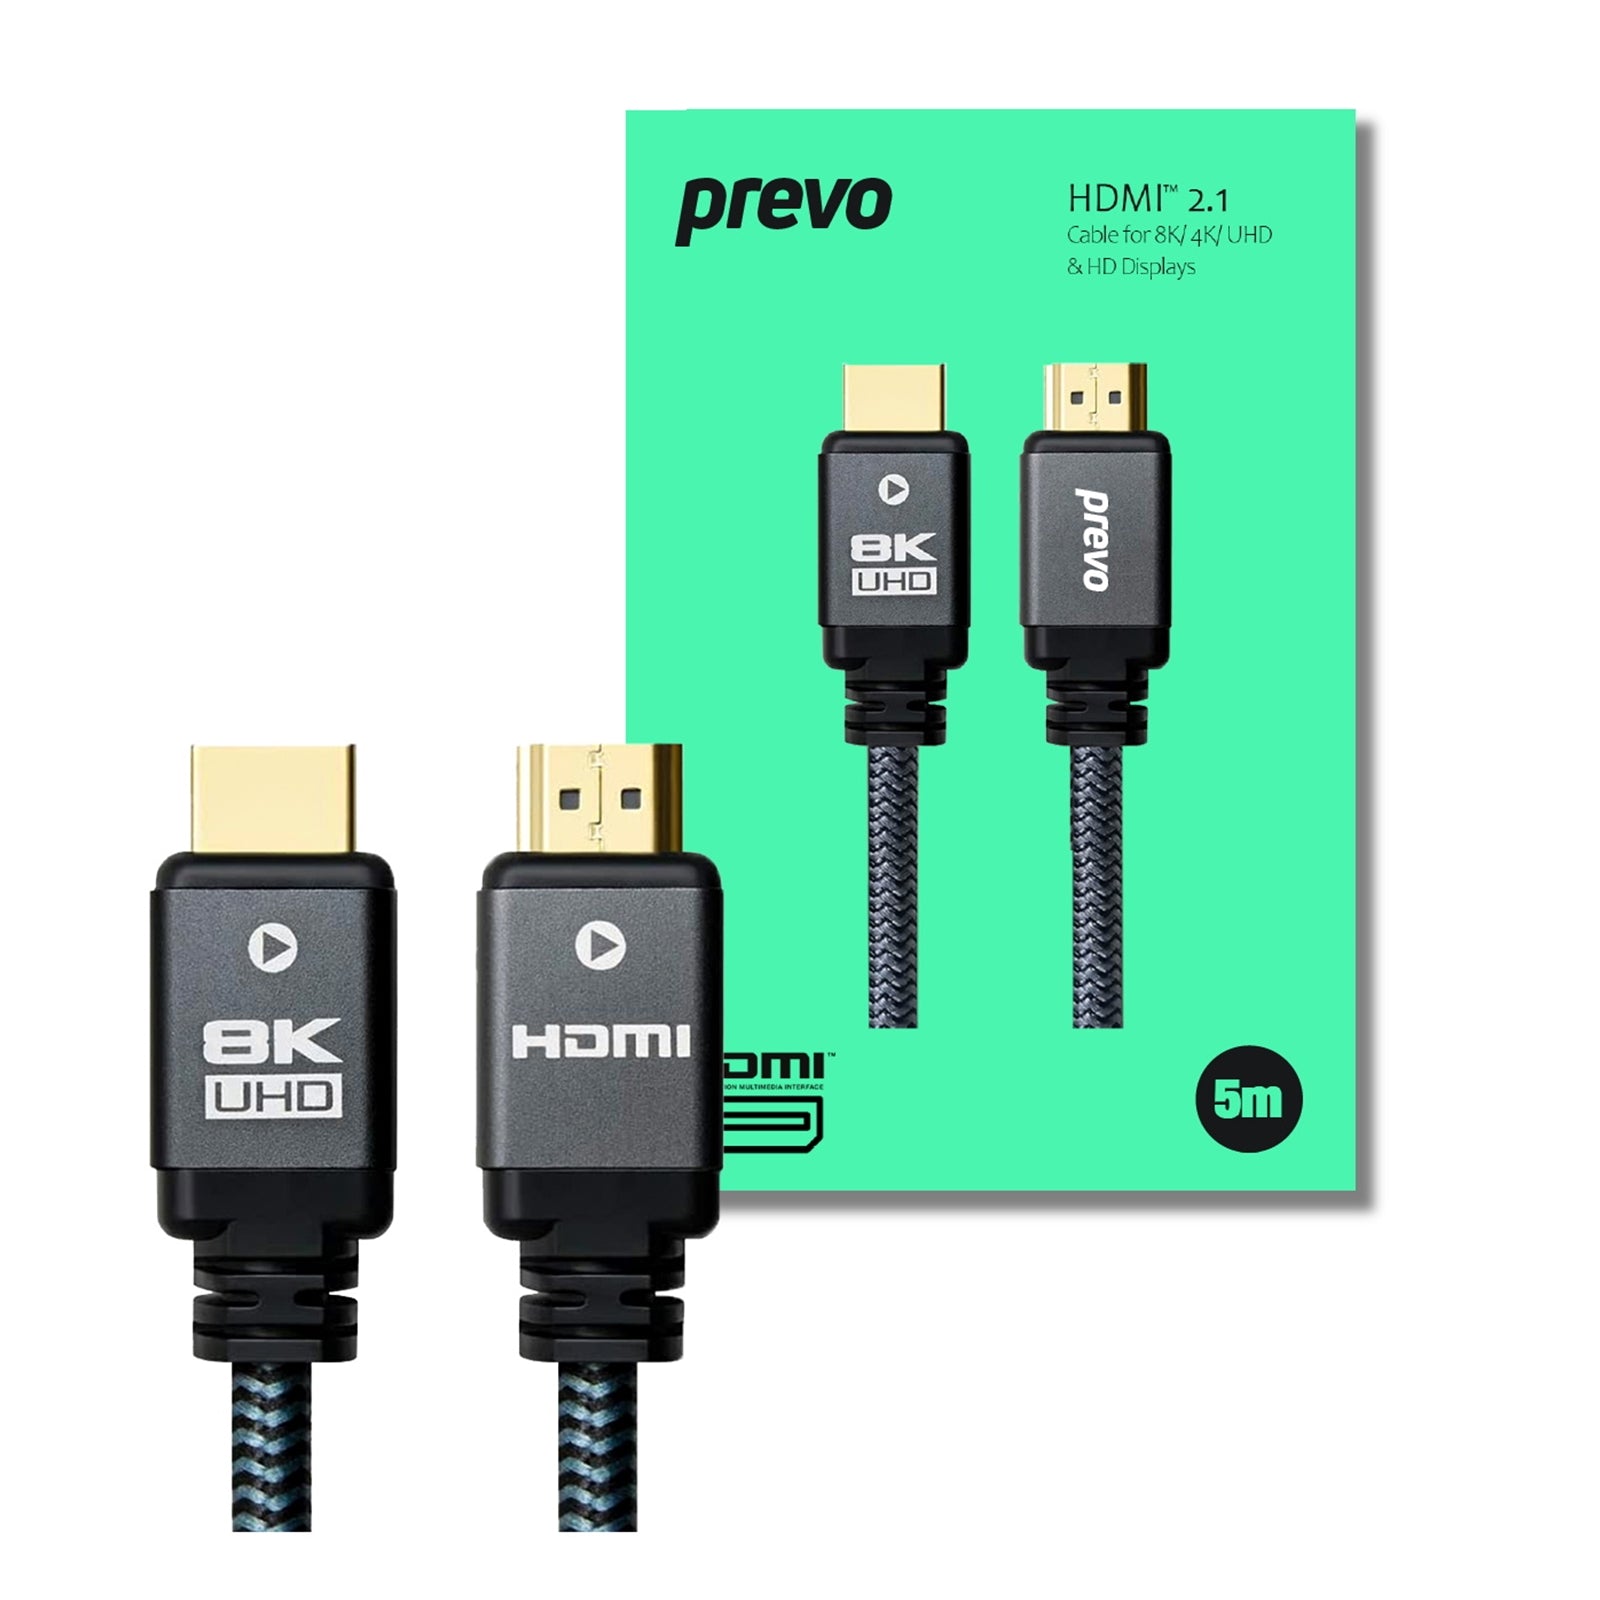 Cables and Connectors of all types HDMI, USB, Audio